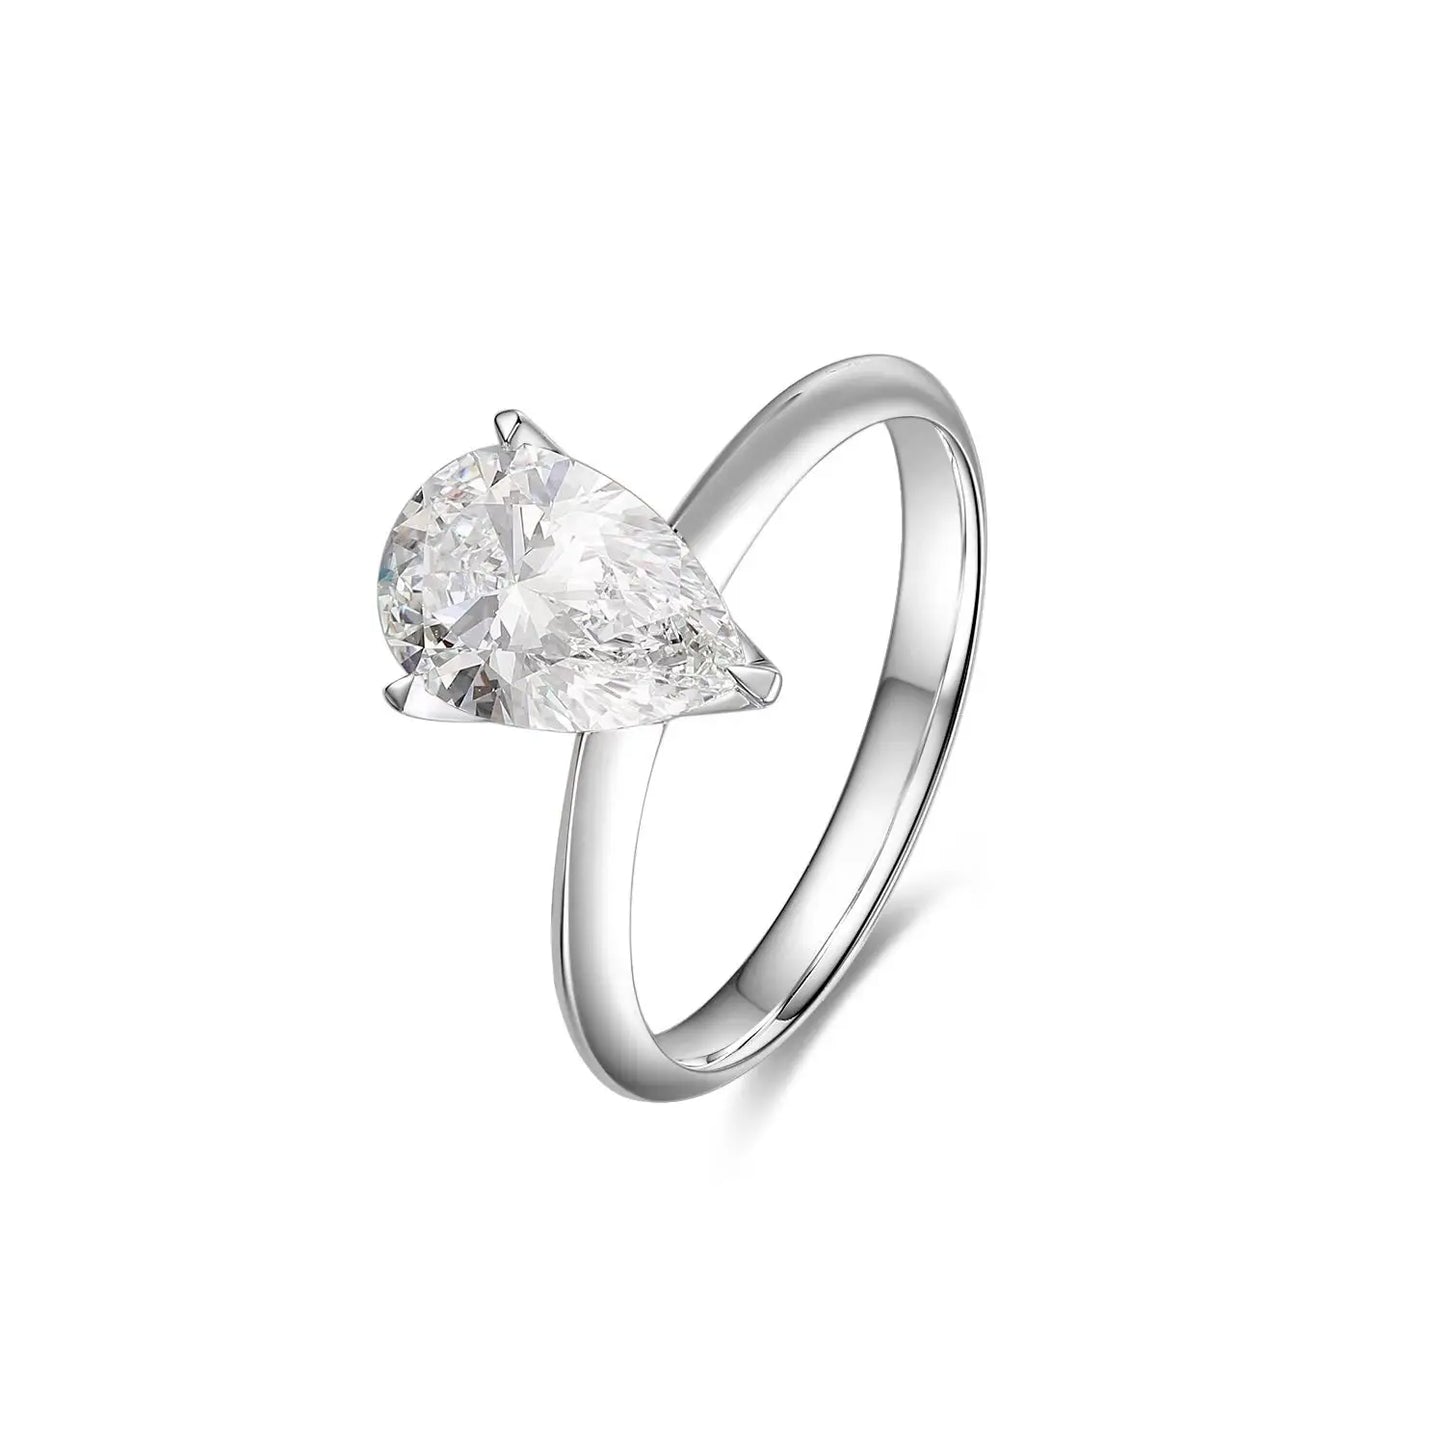 1.1-3.1ct Pear Cut Solitaire VVS1 Diamond Ring in 18K White Gold